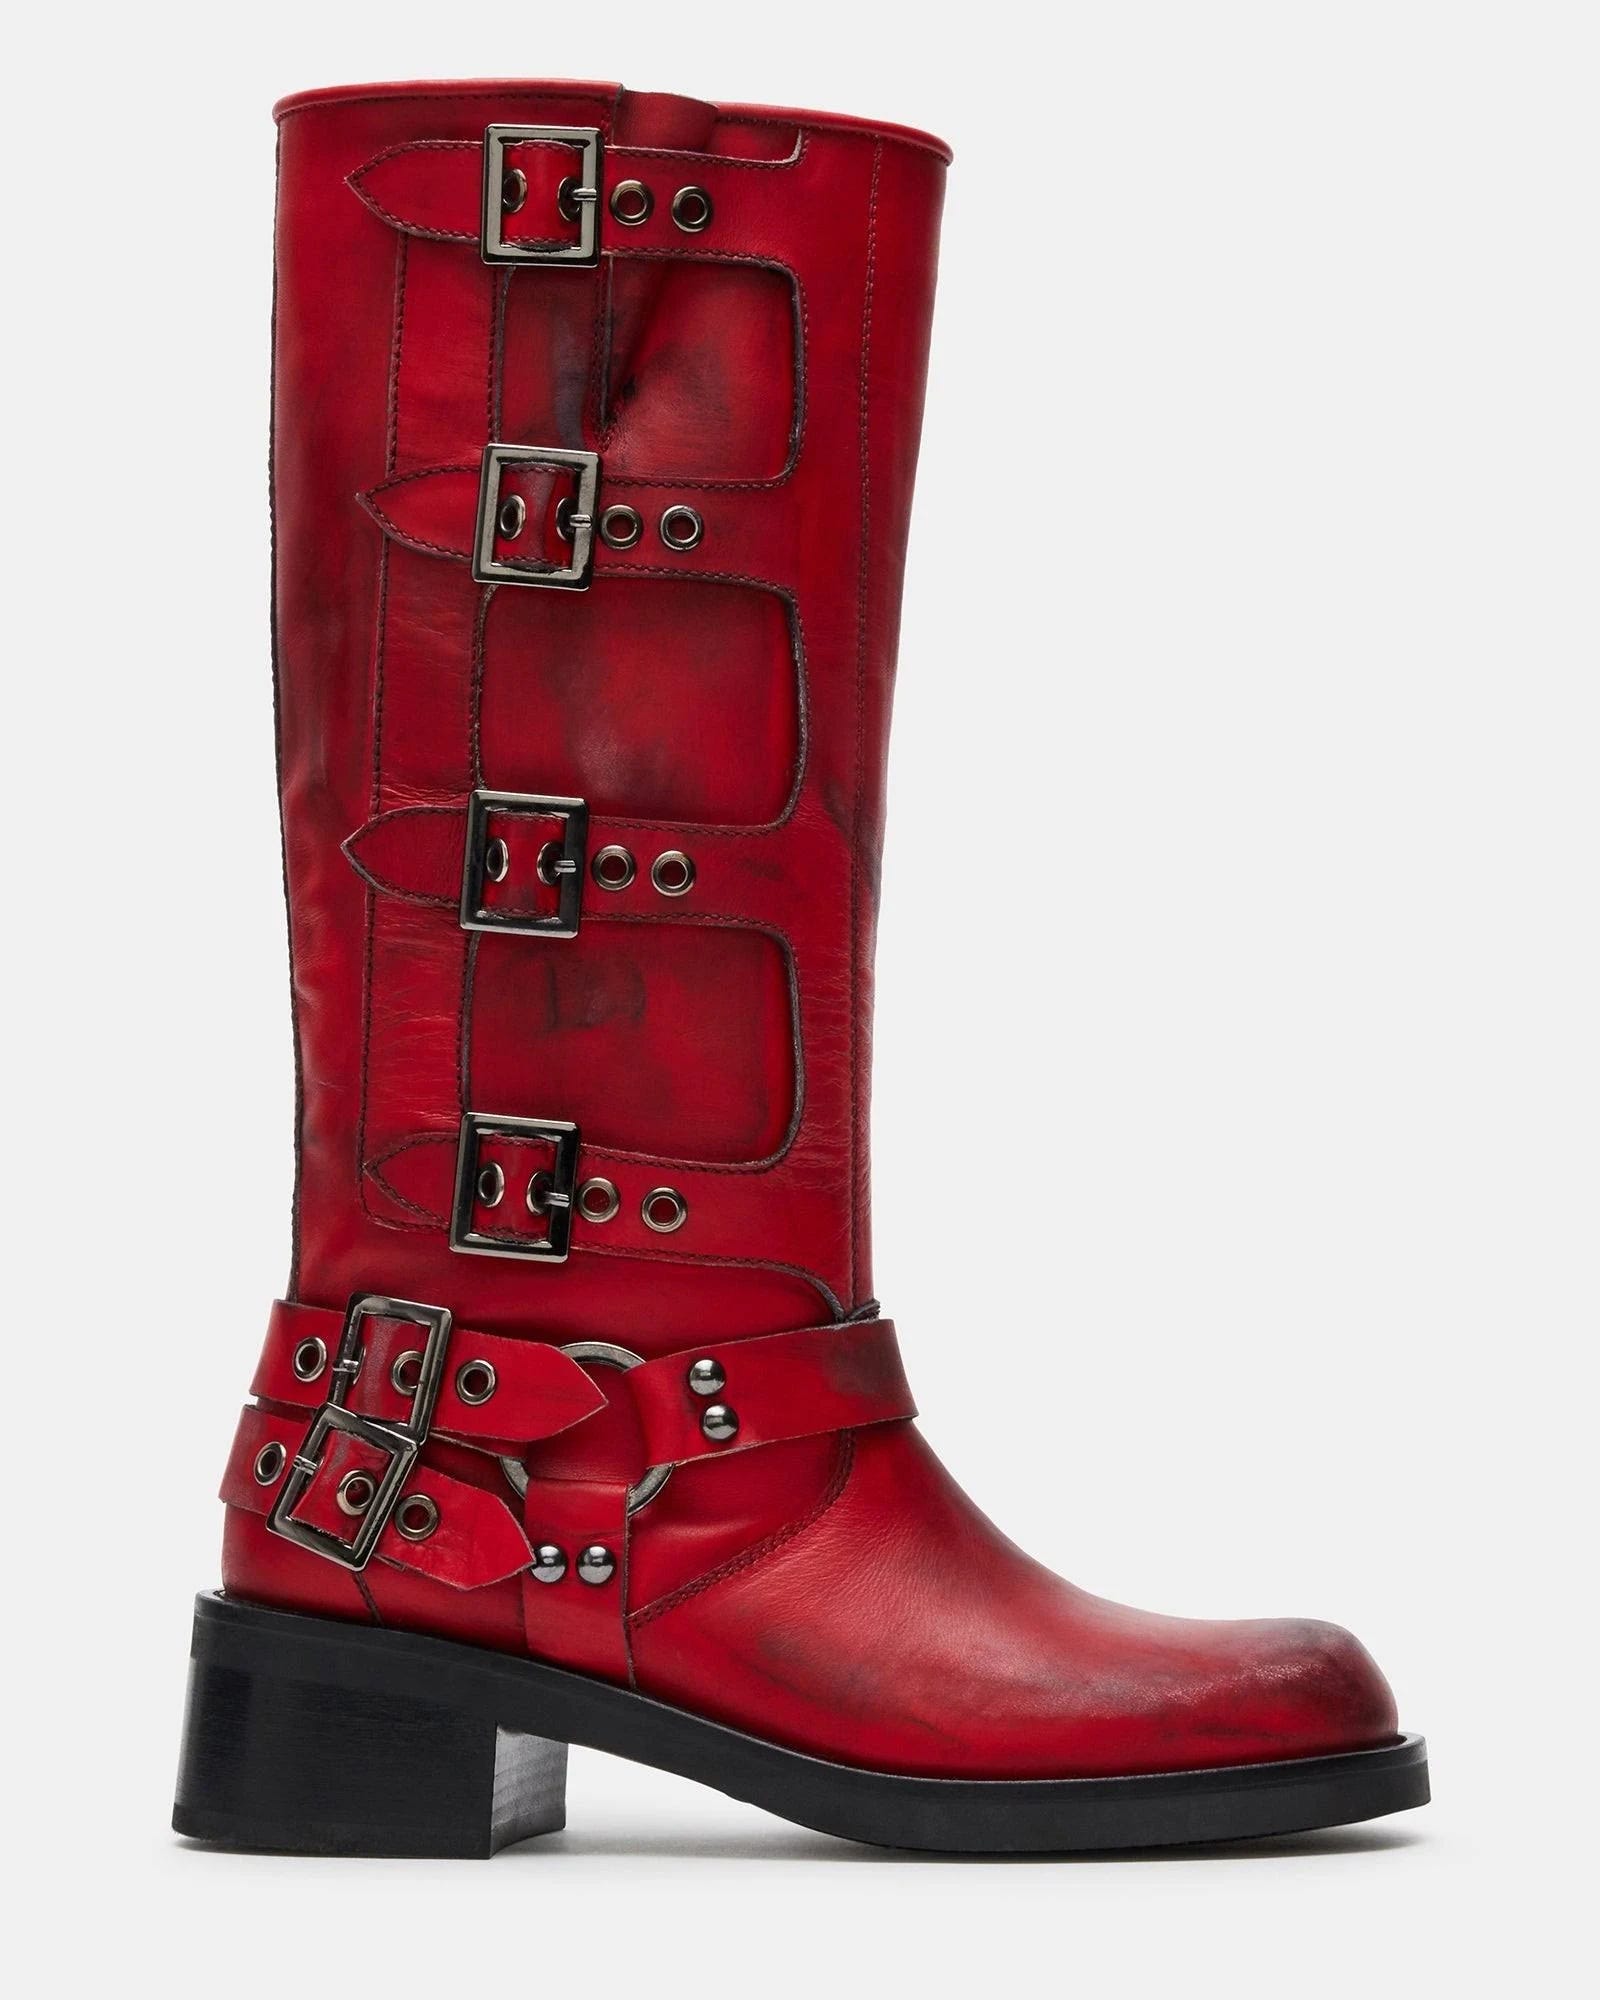 Red Rocky Knee-High Women's Boots by Steve Madden | Image